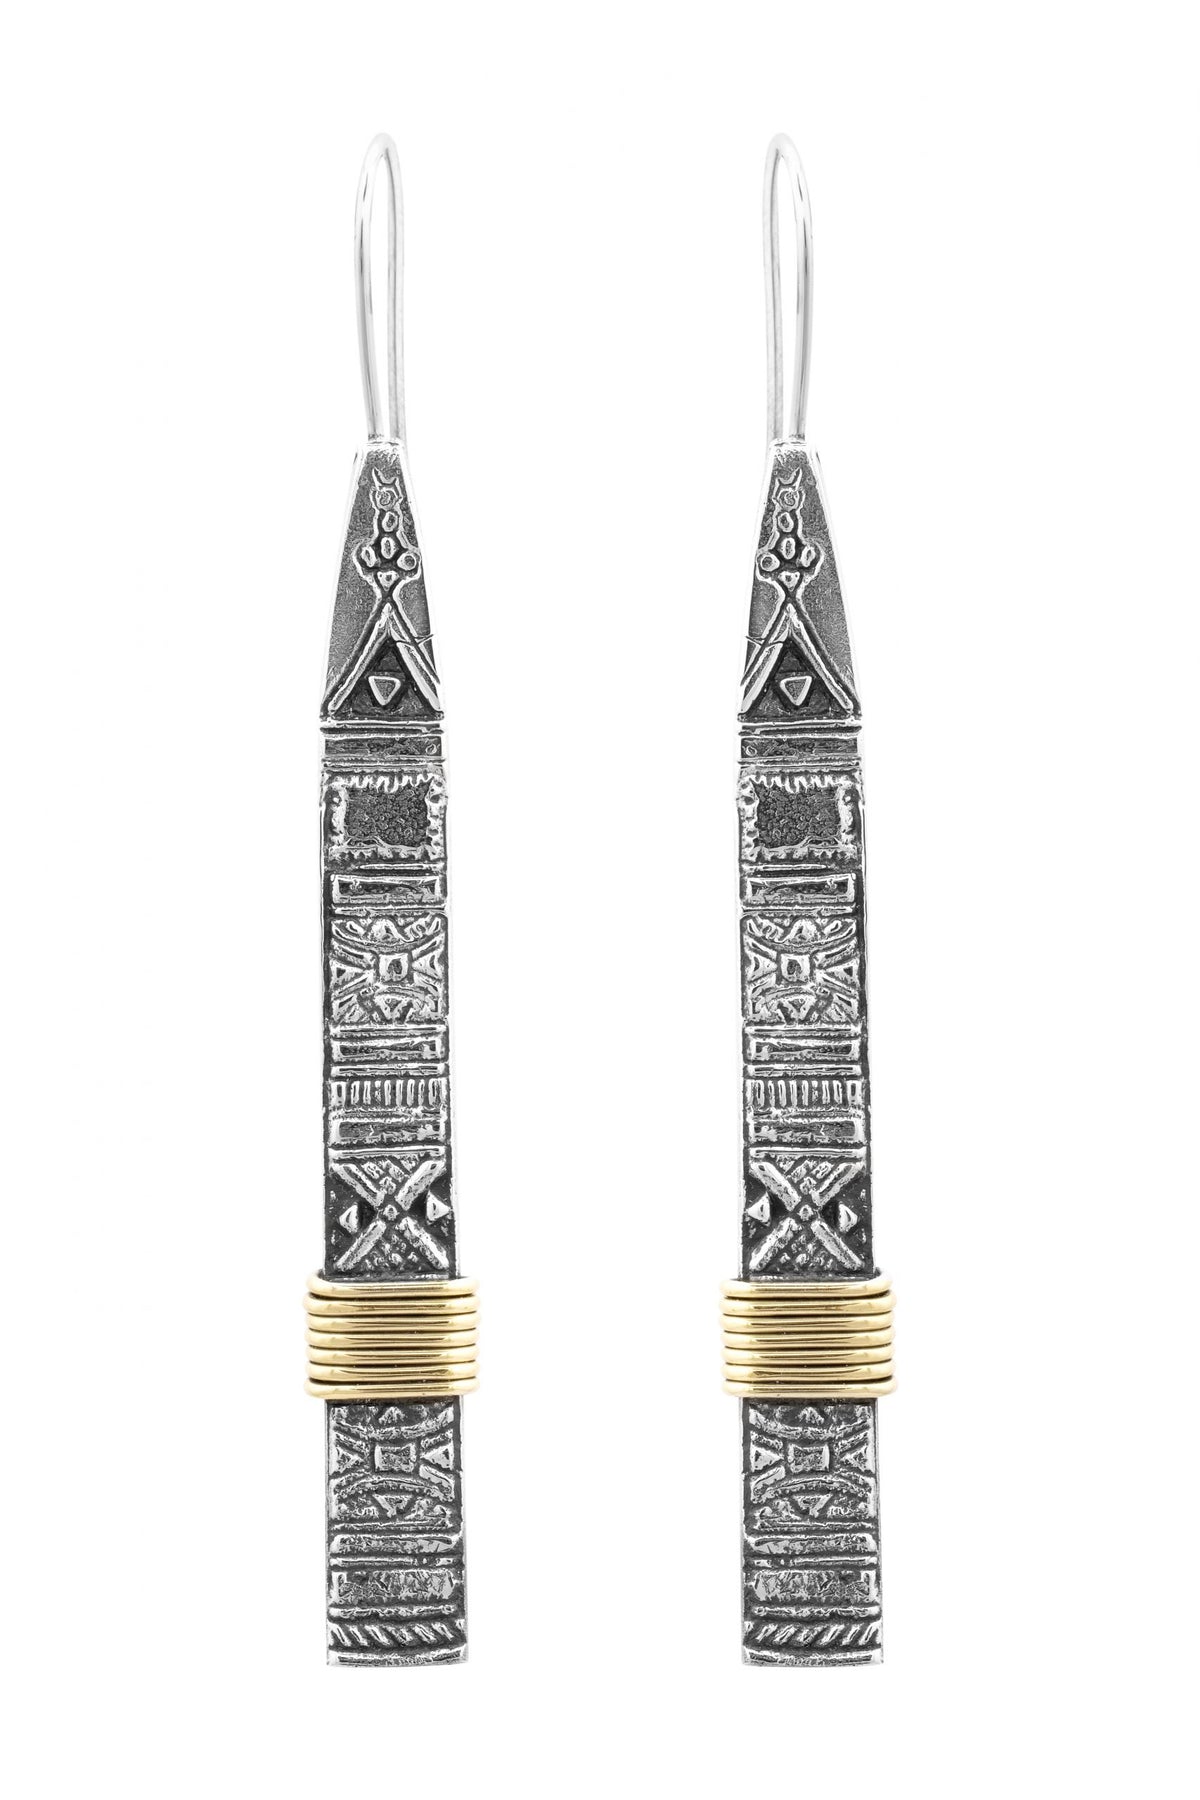 Bahati Earrings - Brass- Gold and Silver Plating